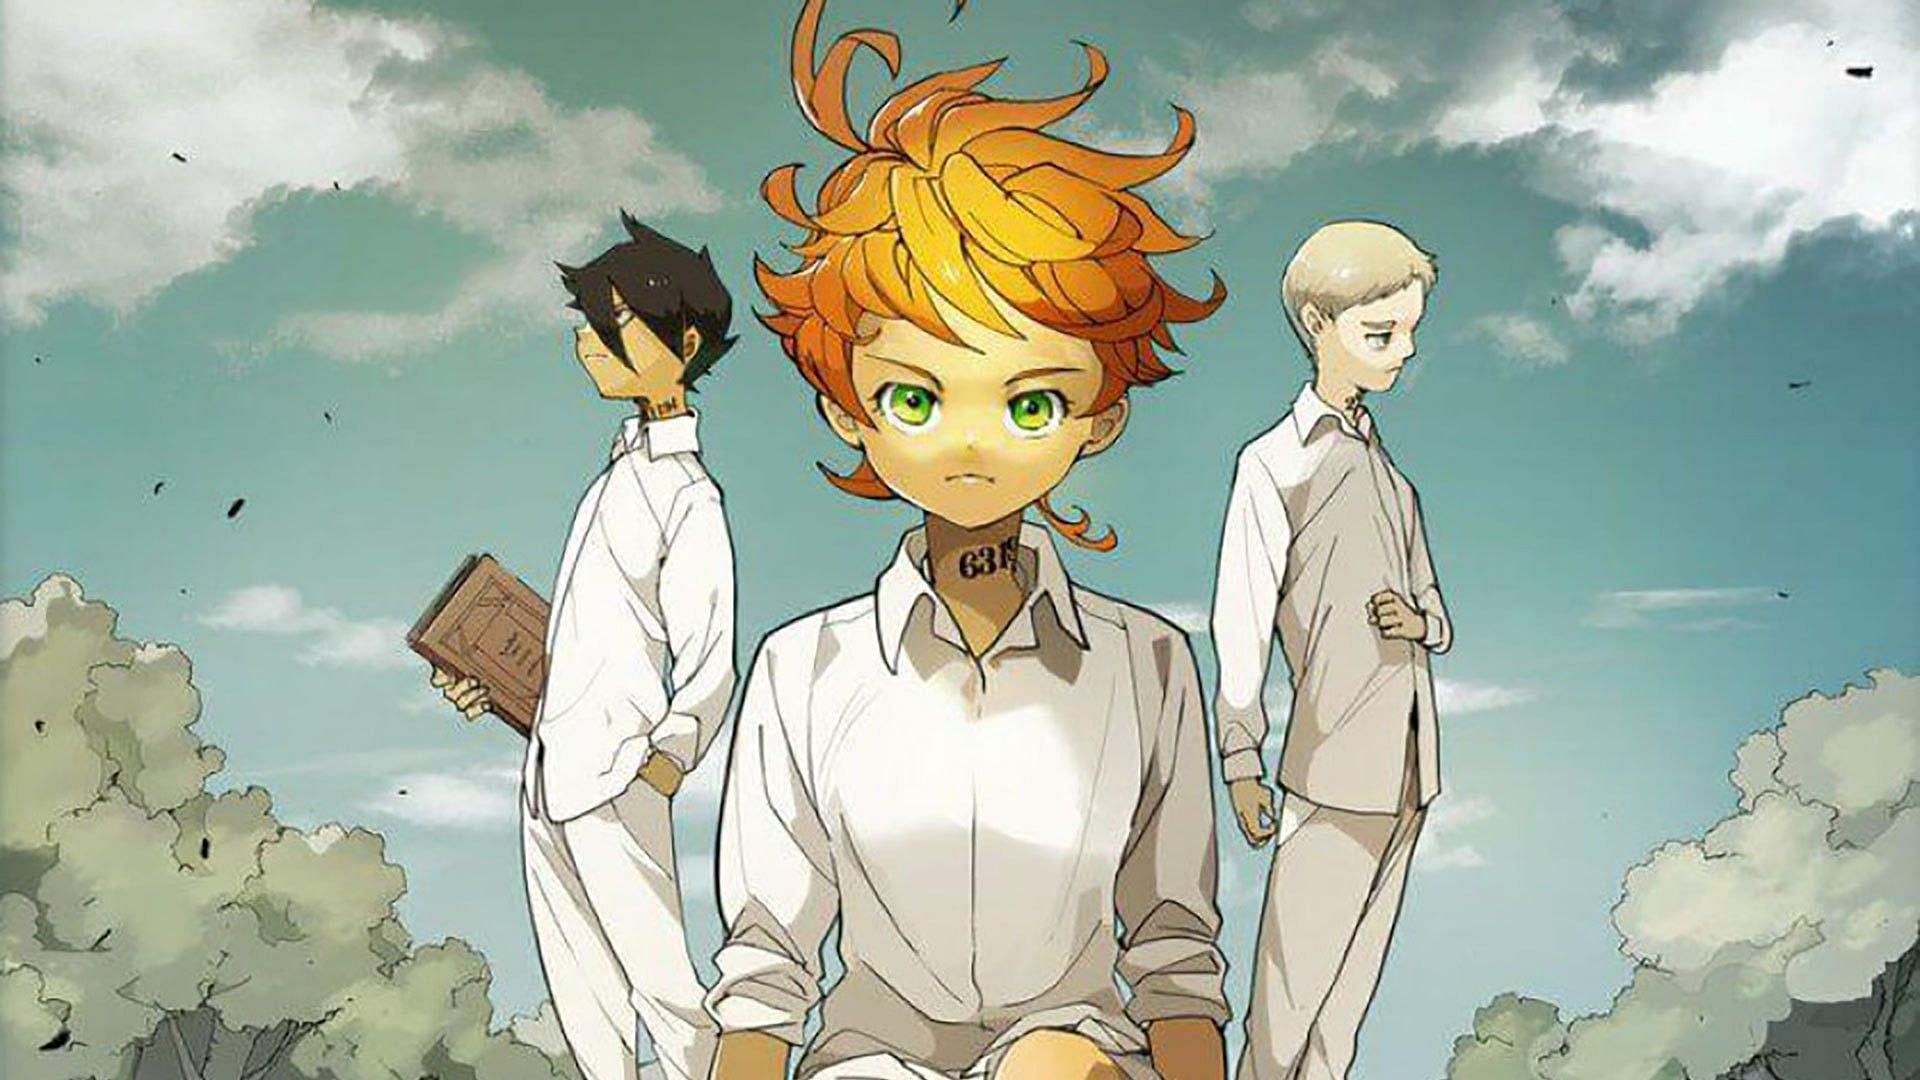 HD desktop wallpaper: Anime, Emma (The Promised Neverland), The Promised  Neverland, Ray (The Promised Neverland), Norman (The Promised Neverland)  download free picture #974416